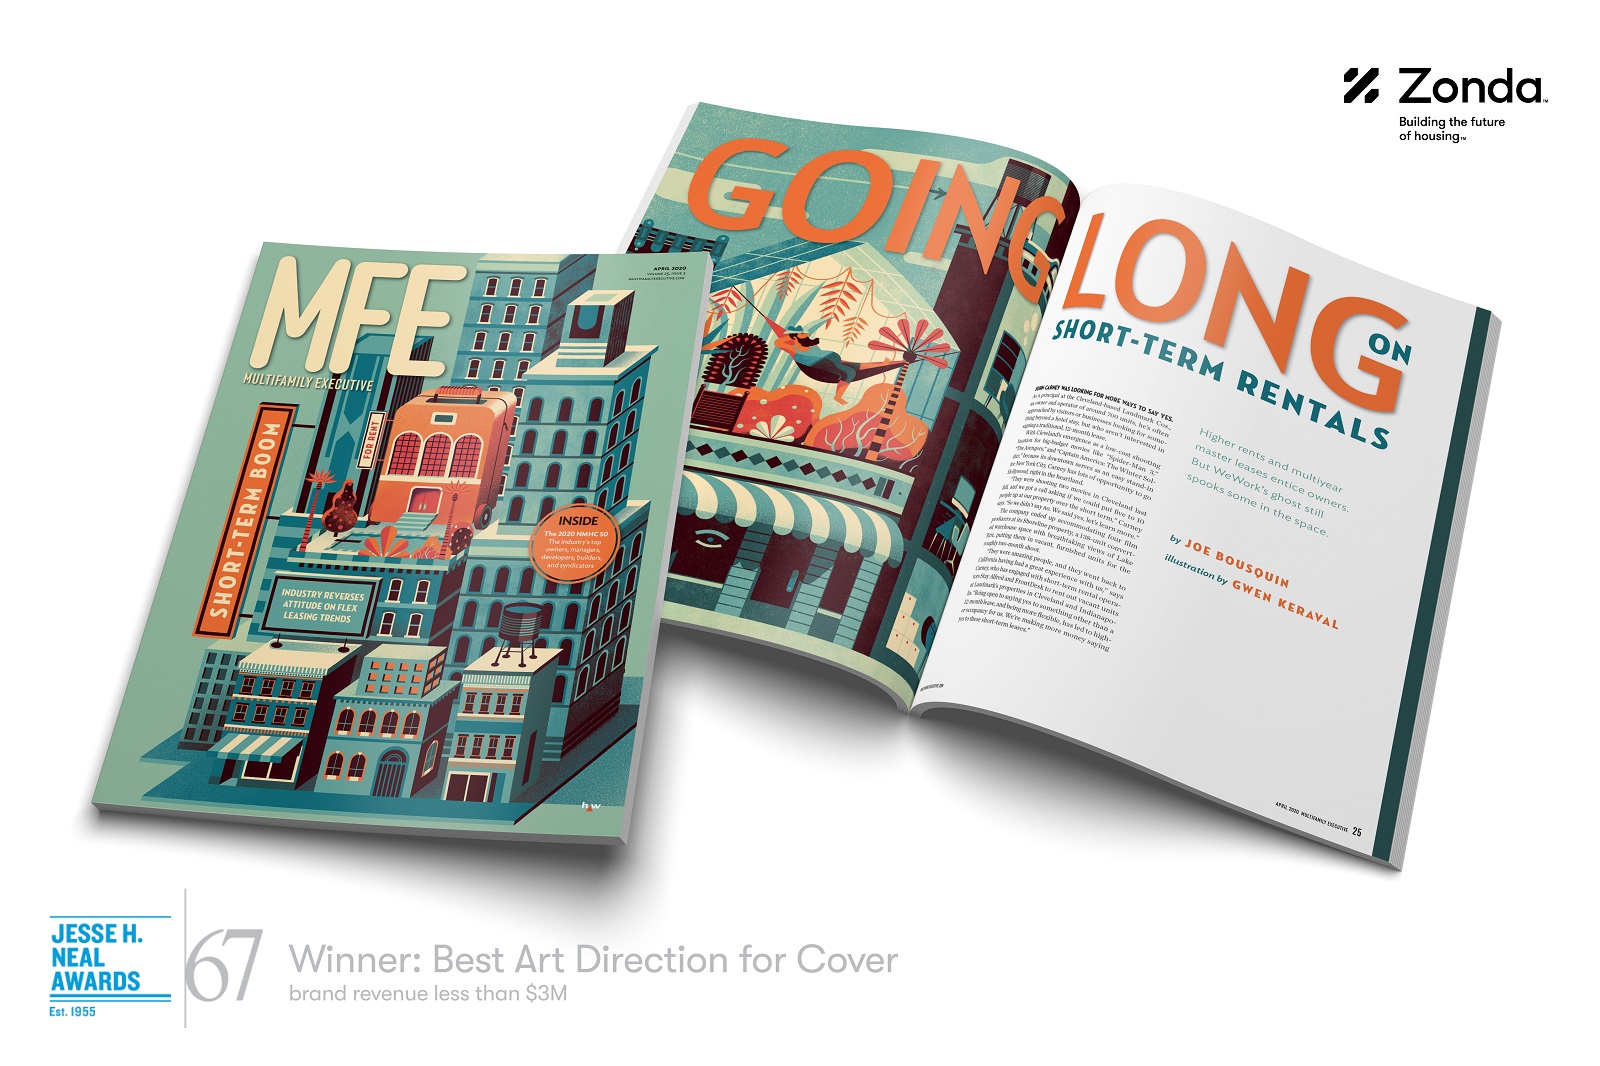 Keraval's NEAL award-winning cover and interior for MFE magazine, art directed by Carolyn Sewell